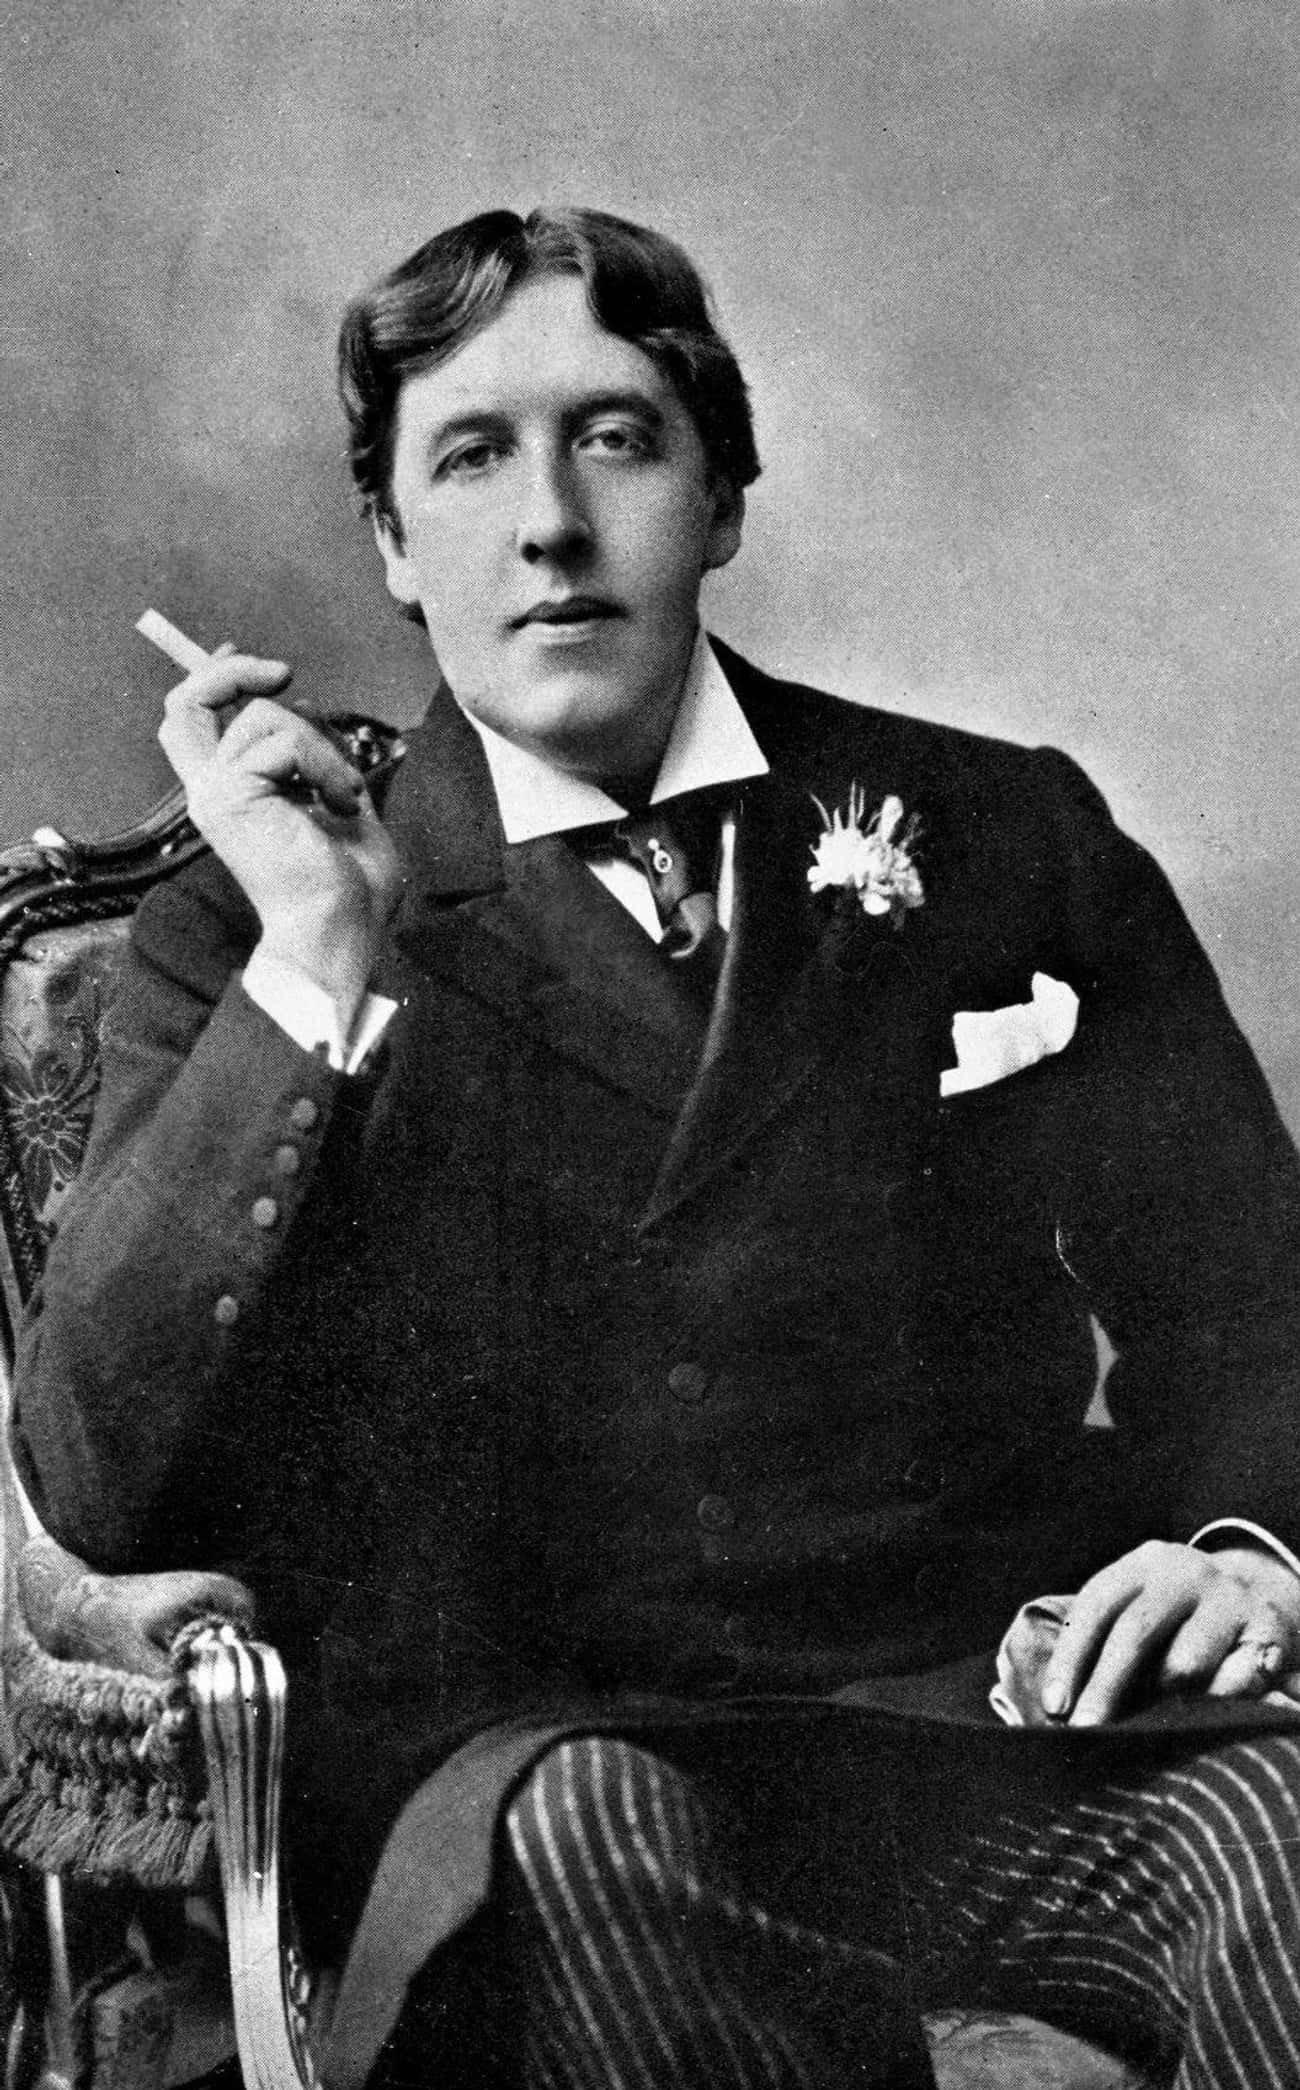 Though Widely Rumored To Have Died Of Syphilis, Oscar Wilde's Cause Of Death Is Still Disputed 